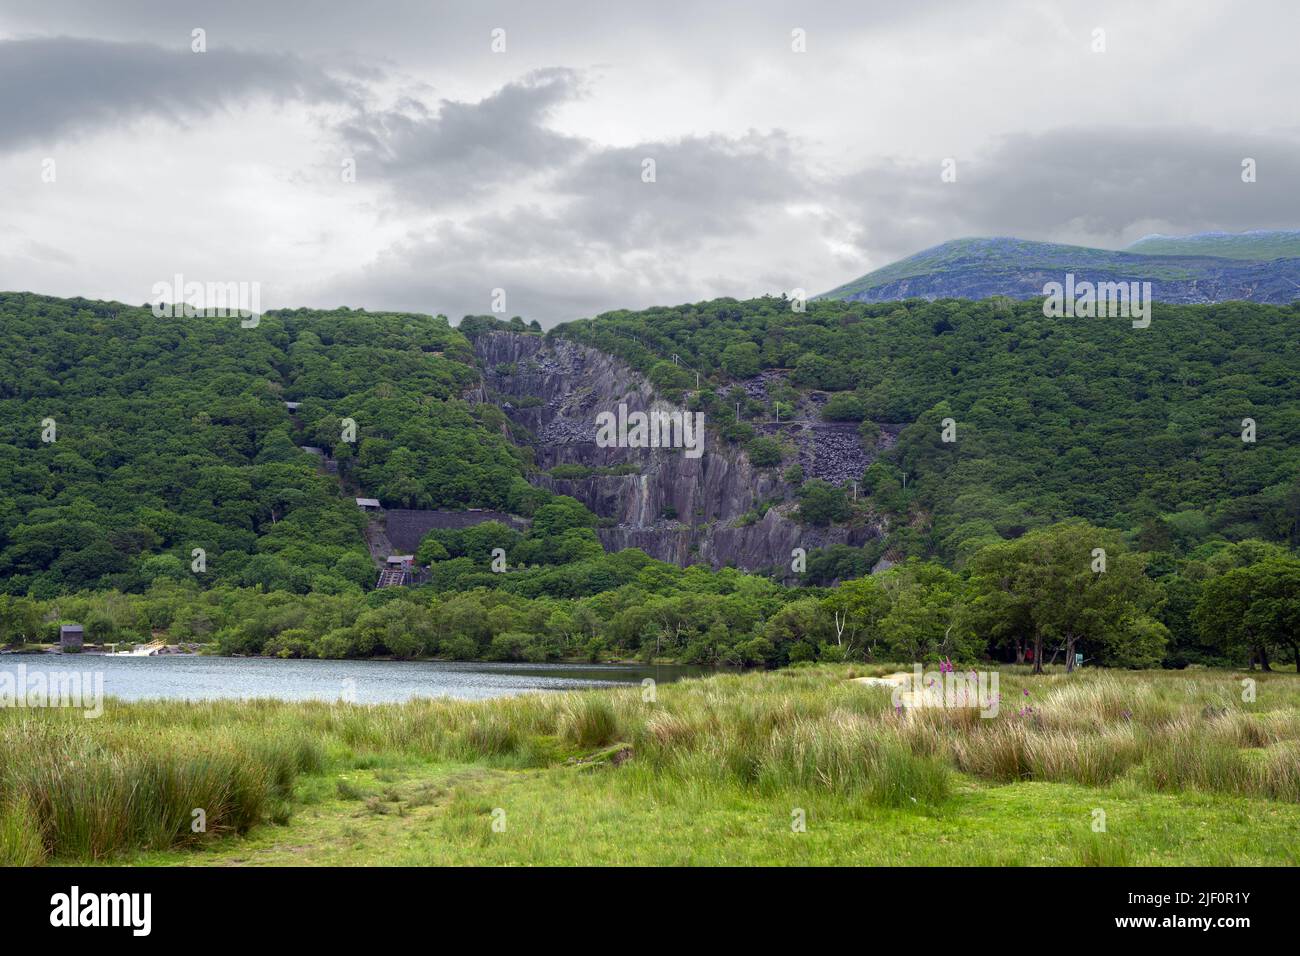 Vivian Slate Quarry is part of the Dinorwic Slate quarries near Llanberis in Snowdonia. It was worked from 1787 to 1960. It became a deep lagoon. Stock Photo